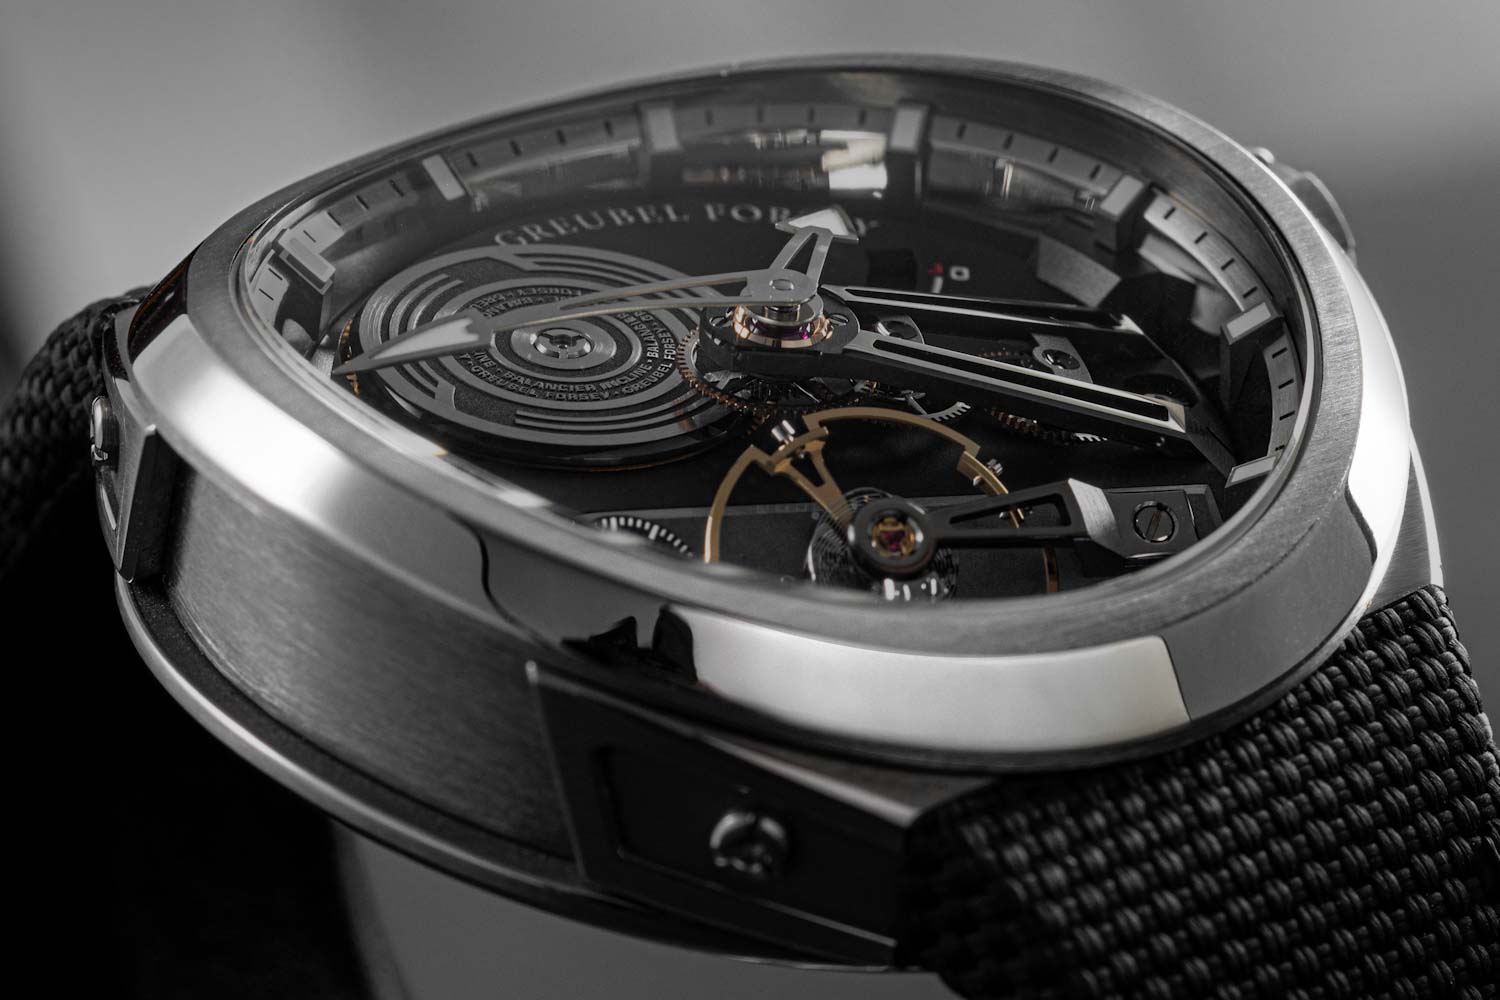 The titanium ovoid case is a groundbreaking piece of design, as the whole case is contoured to fit the wrist. The sapphire crystal and movement bridges are fashioned in the same shape as the case, which gives the entire watch visual harmony. (Image: Revolution©)